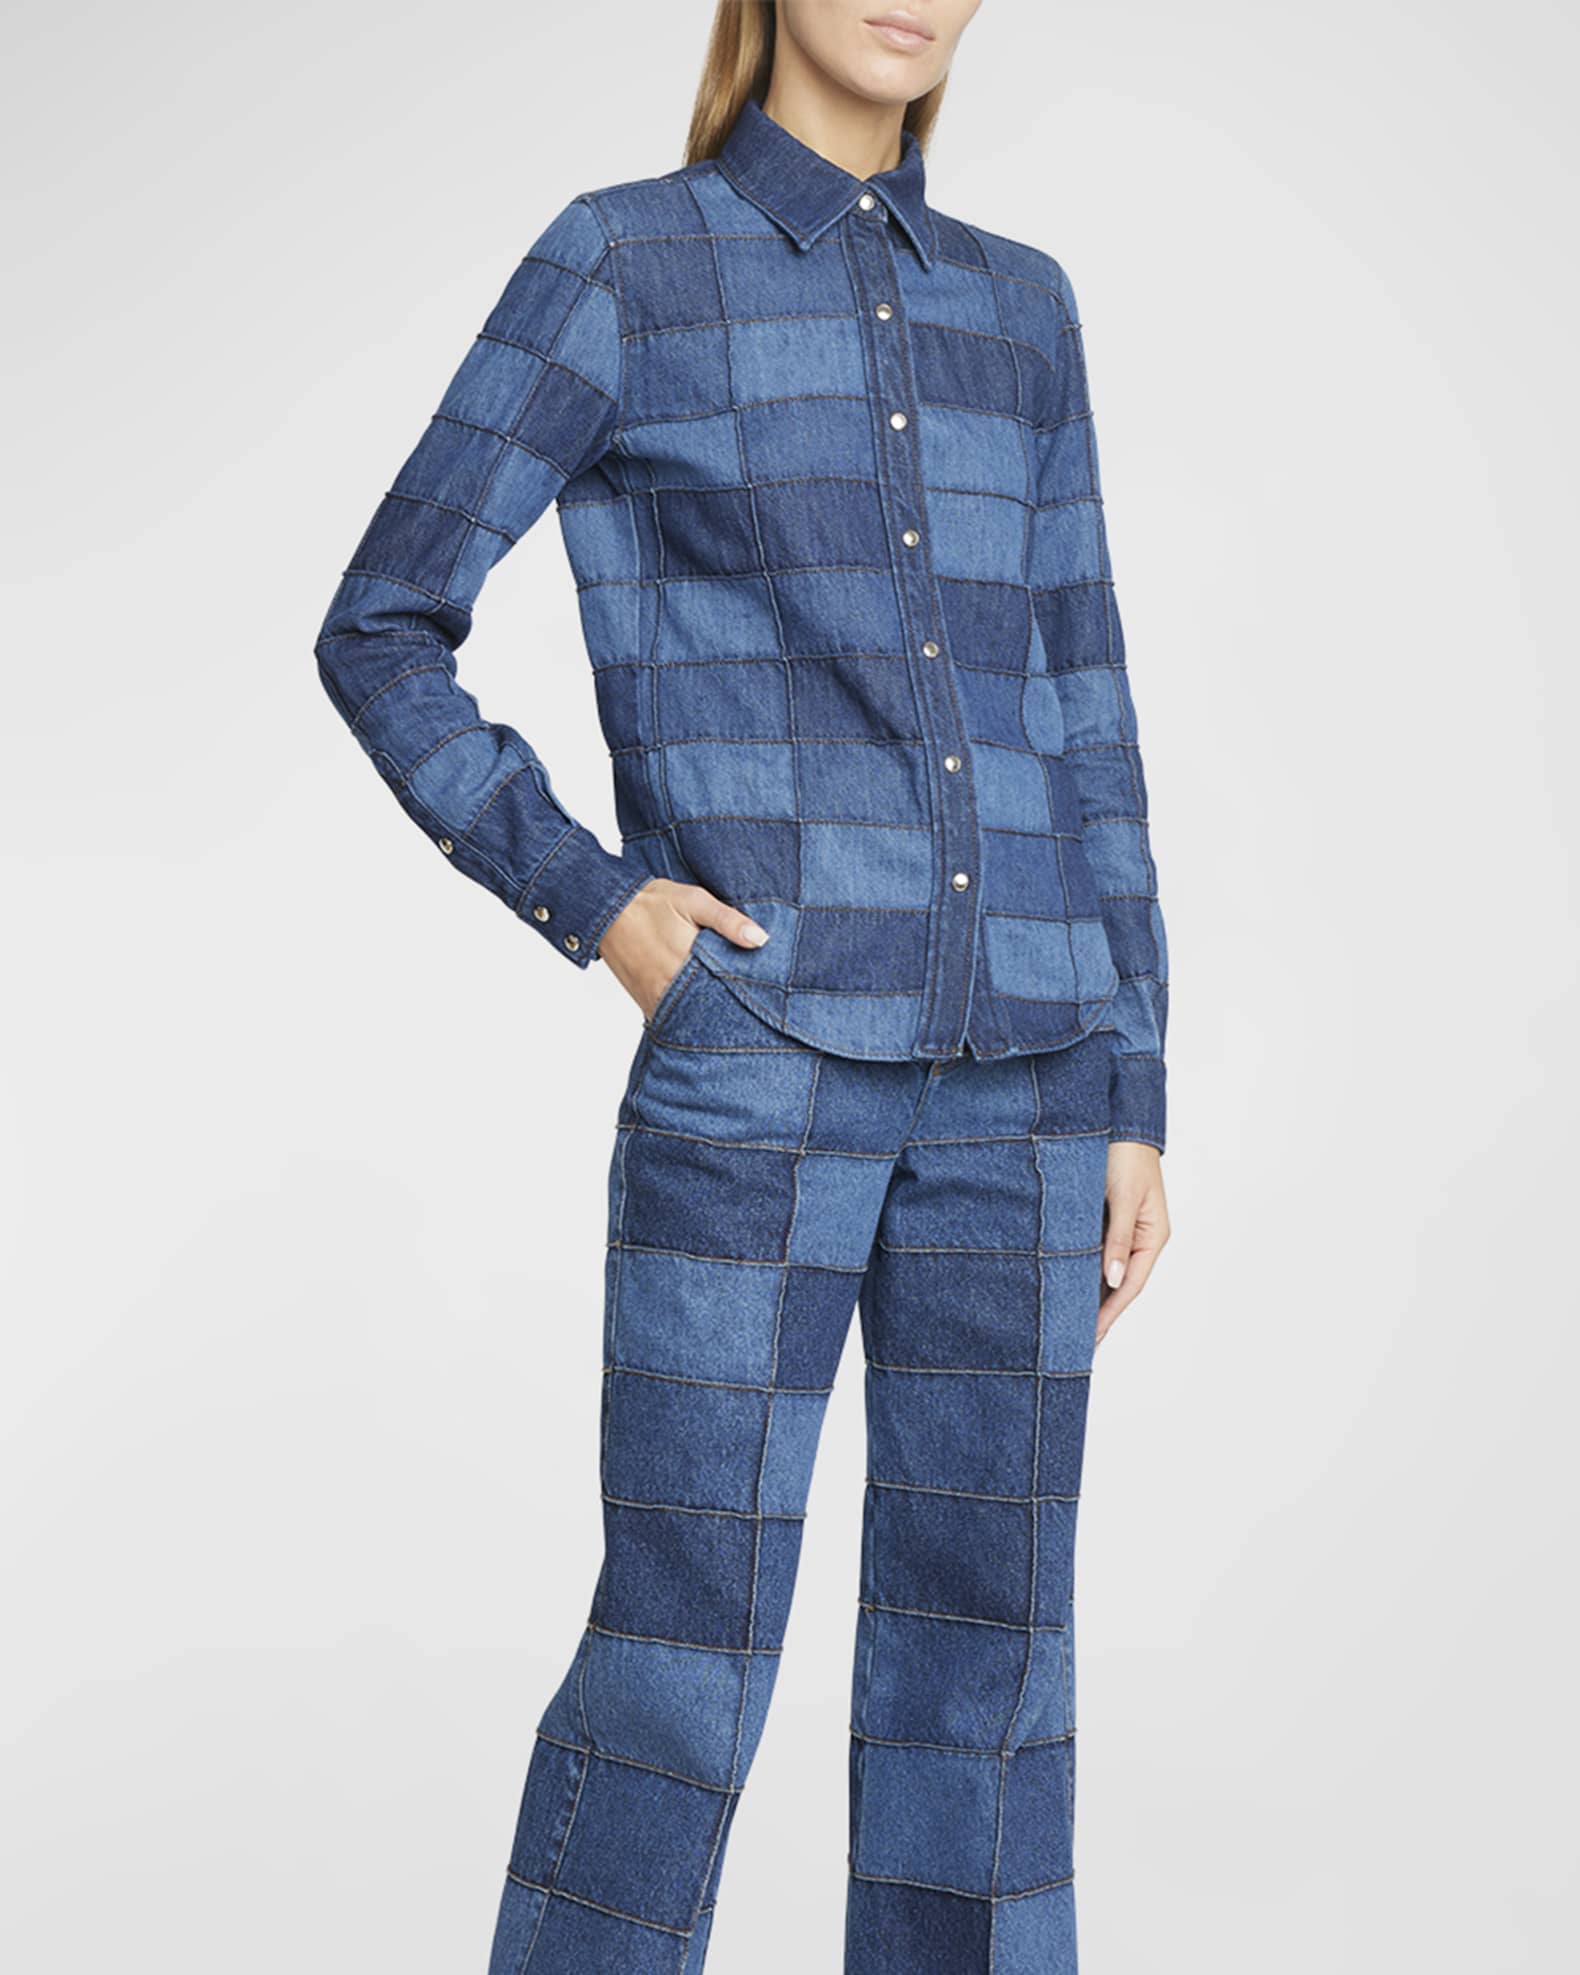 Chloe Recycled Patchwork Denim Button-Front Shirt | Neiman Marcus